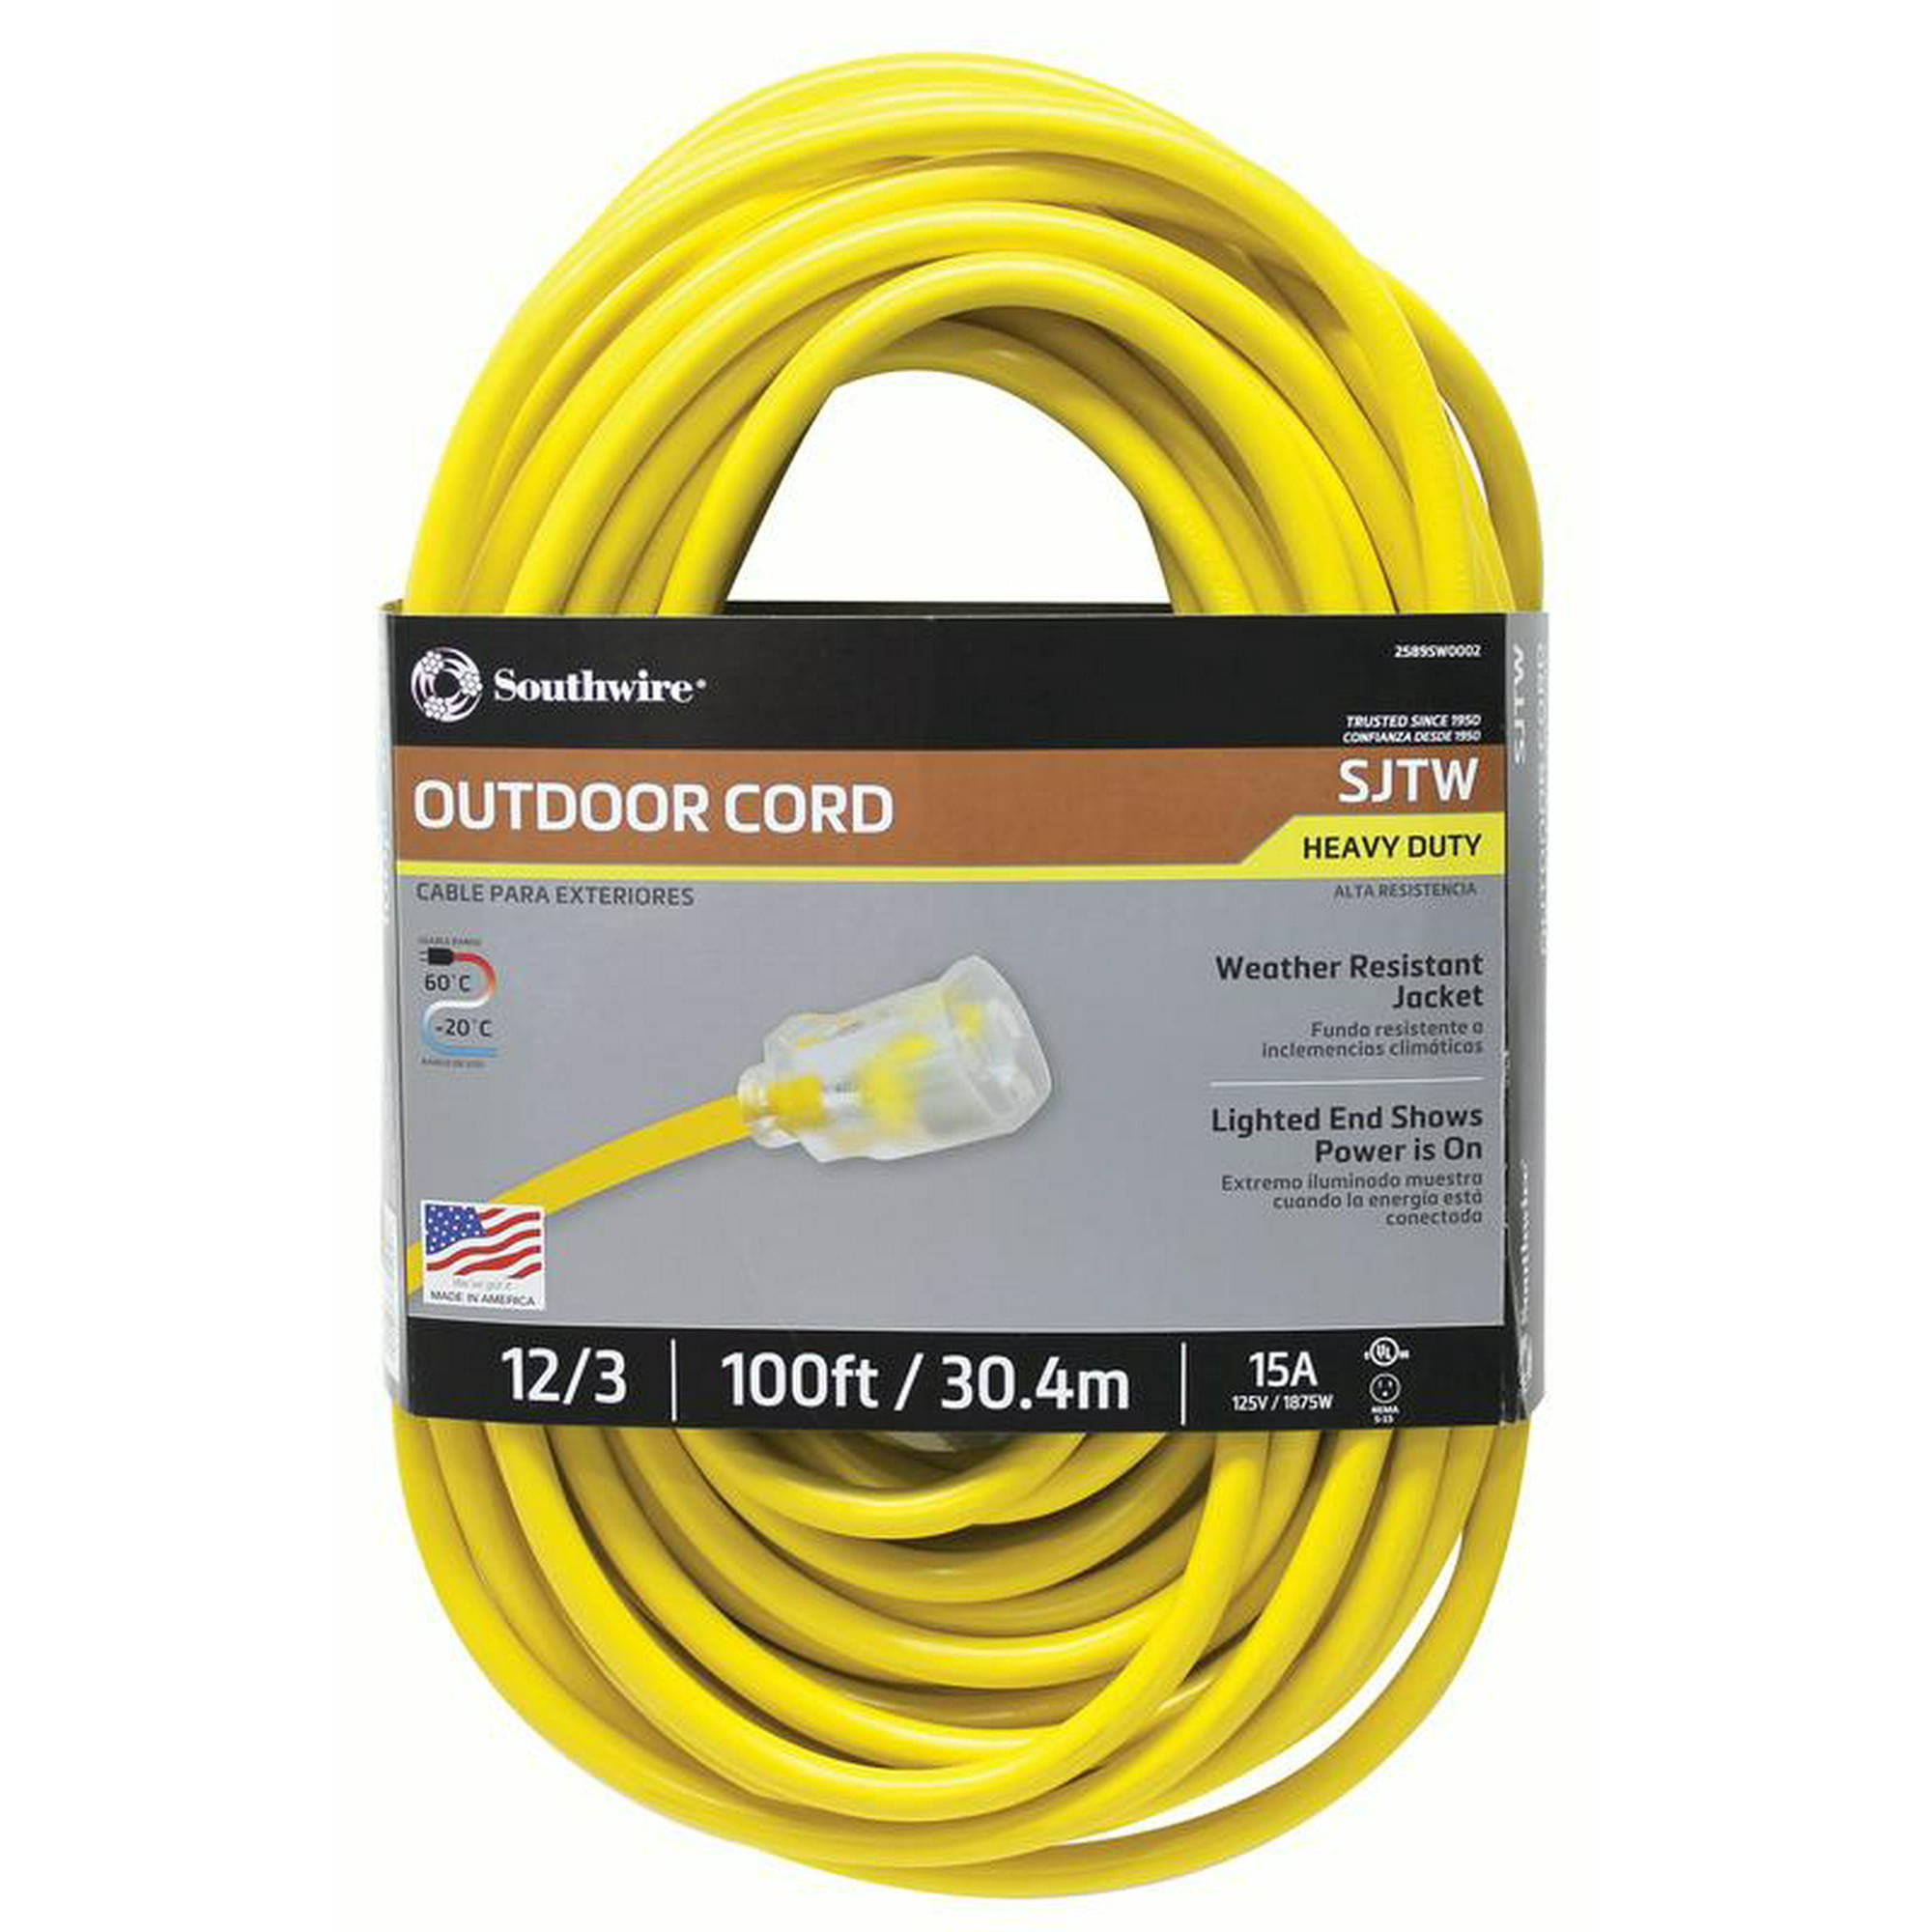 Southwire Outdoor Cord-12/3 SJTW Heavy Duty 3 Prong Extension Cord, Water Resistant Vinyl Jacket, Yellow, 100 Feet